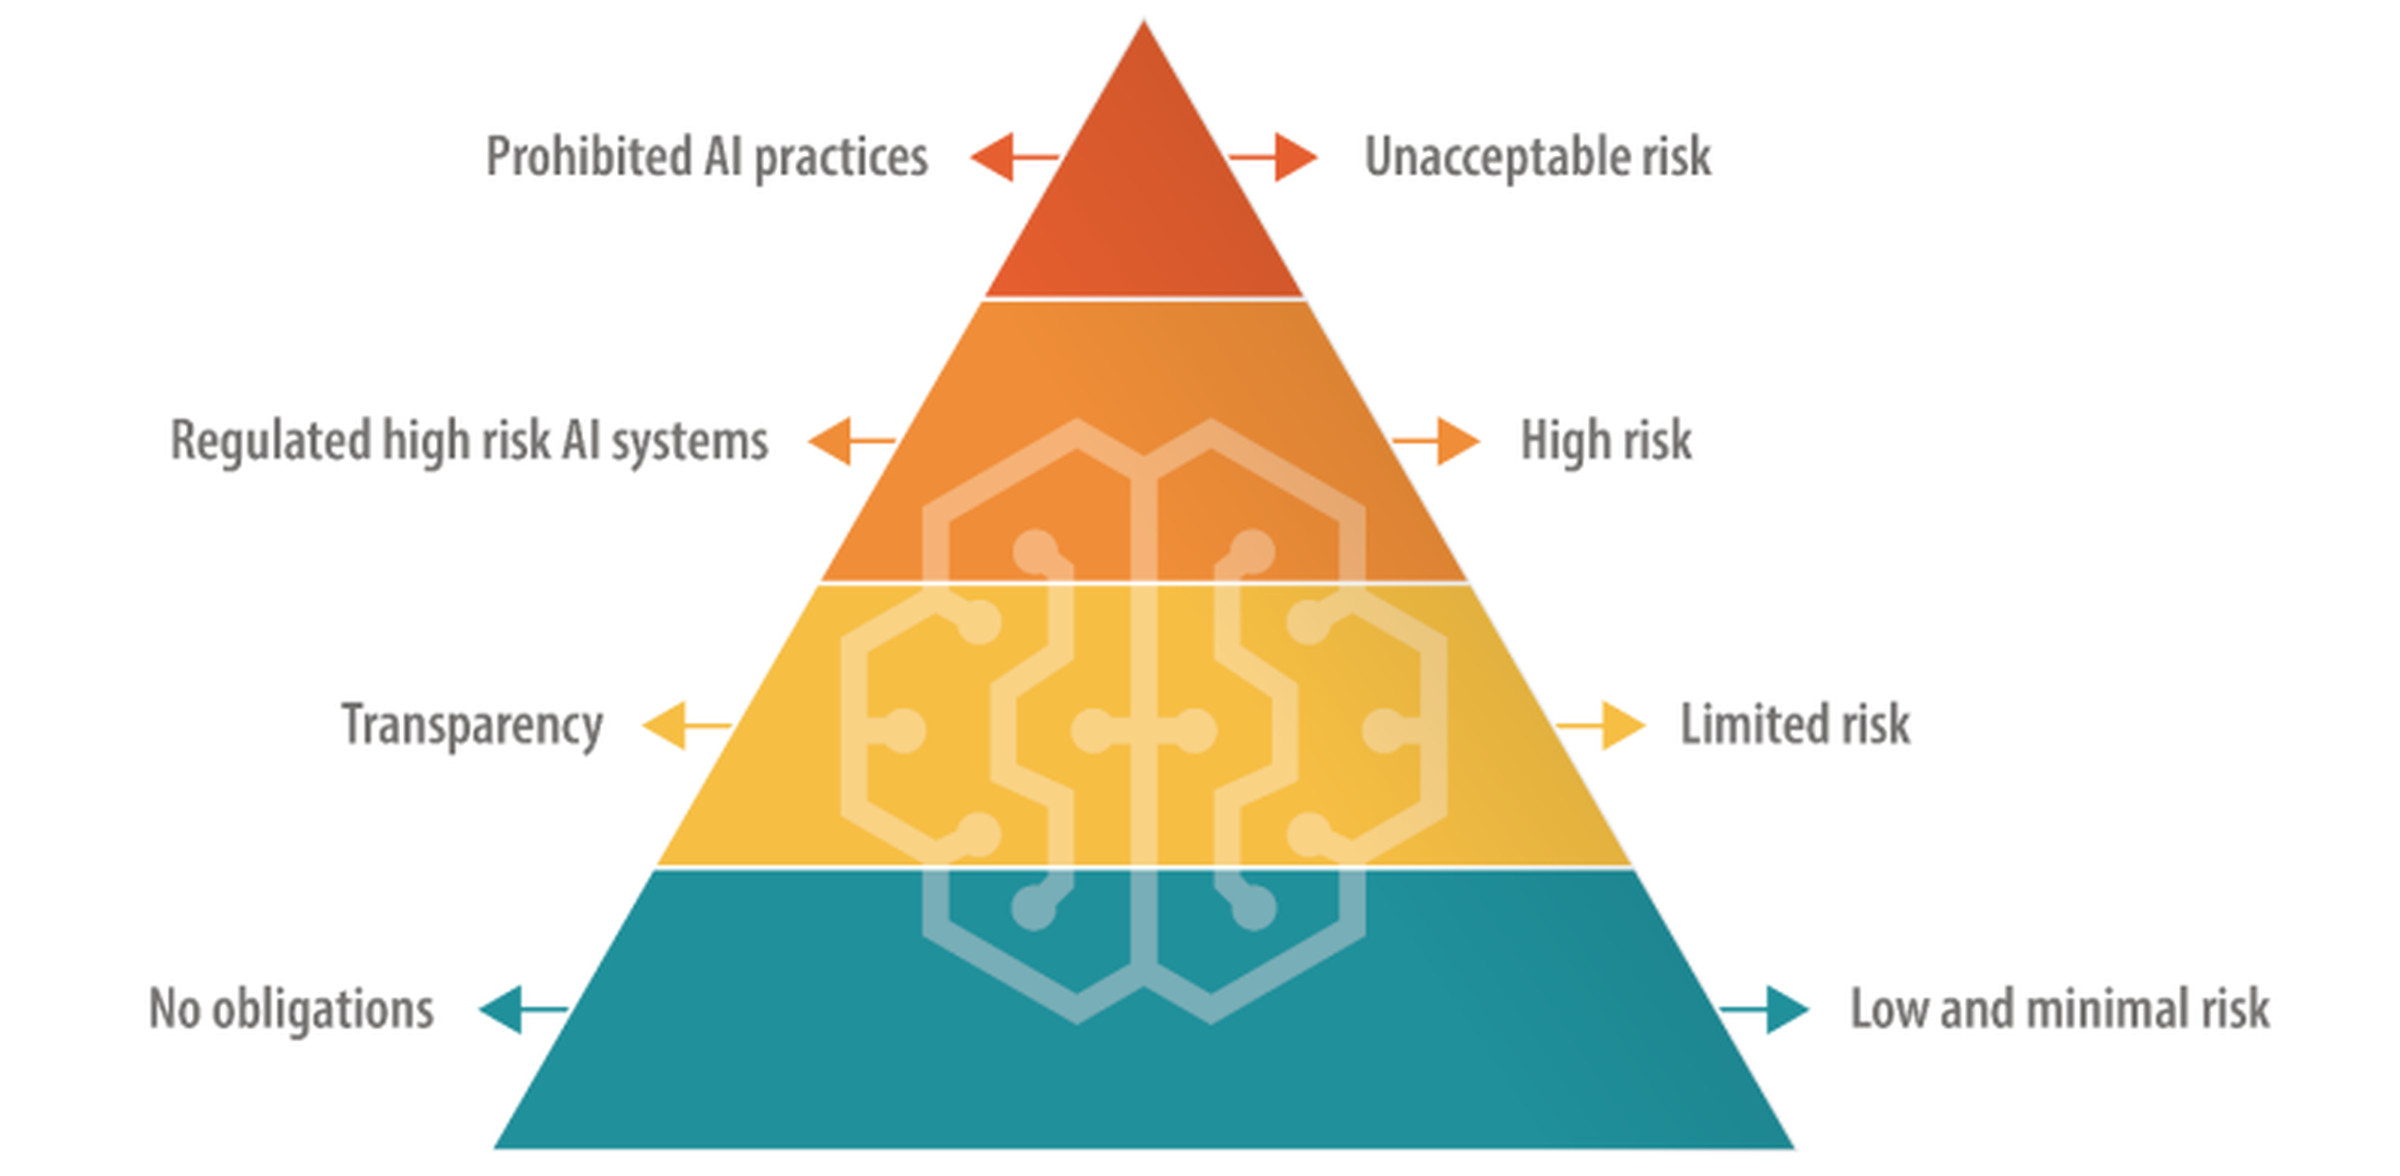 A pyramid diagram with different tiers labeled for “unacceptable,” “high,” “limited,” and “low” risk.